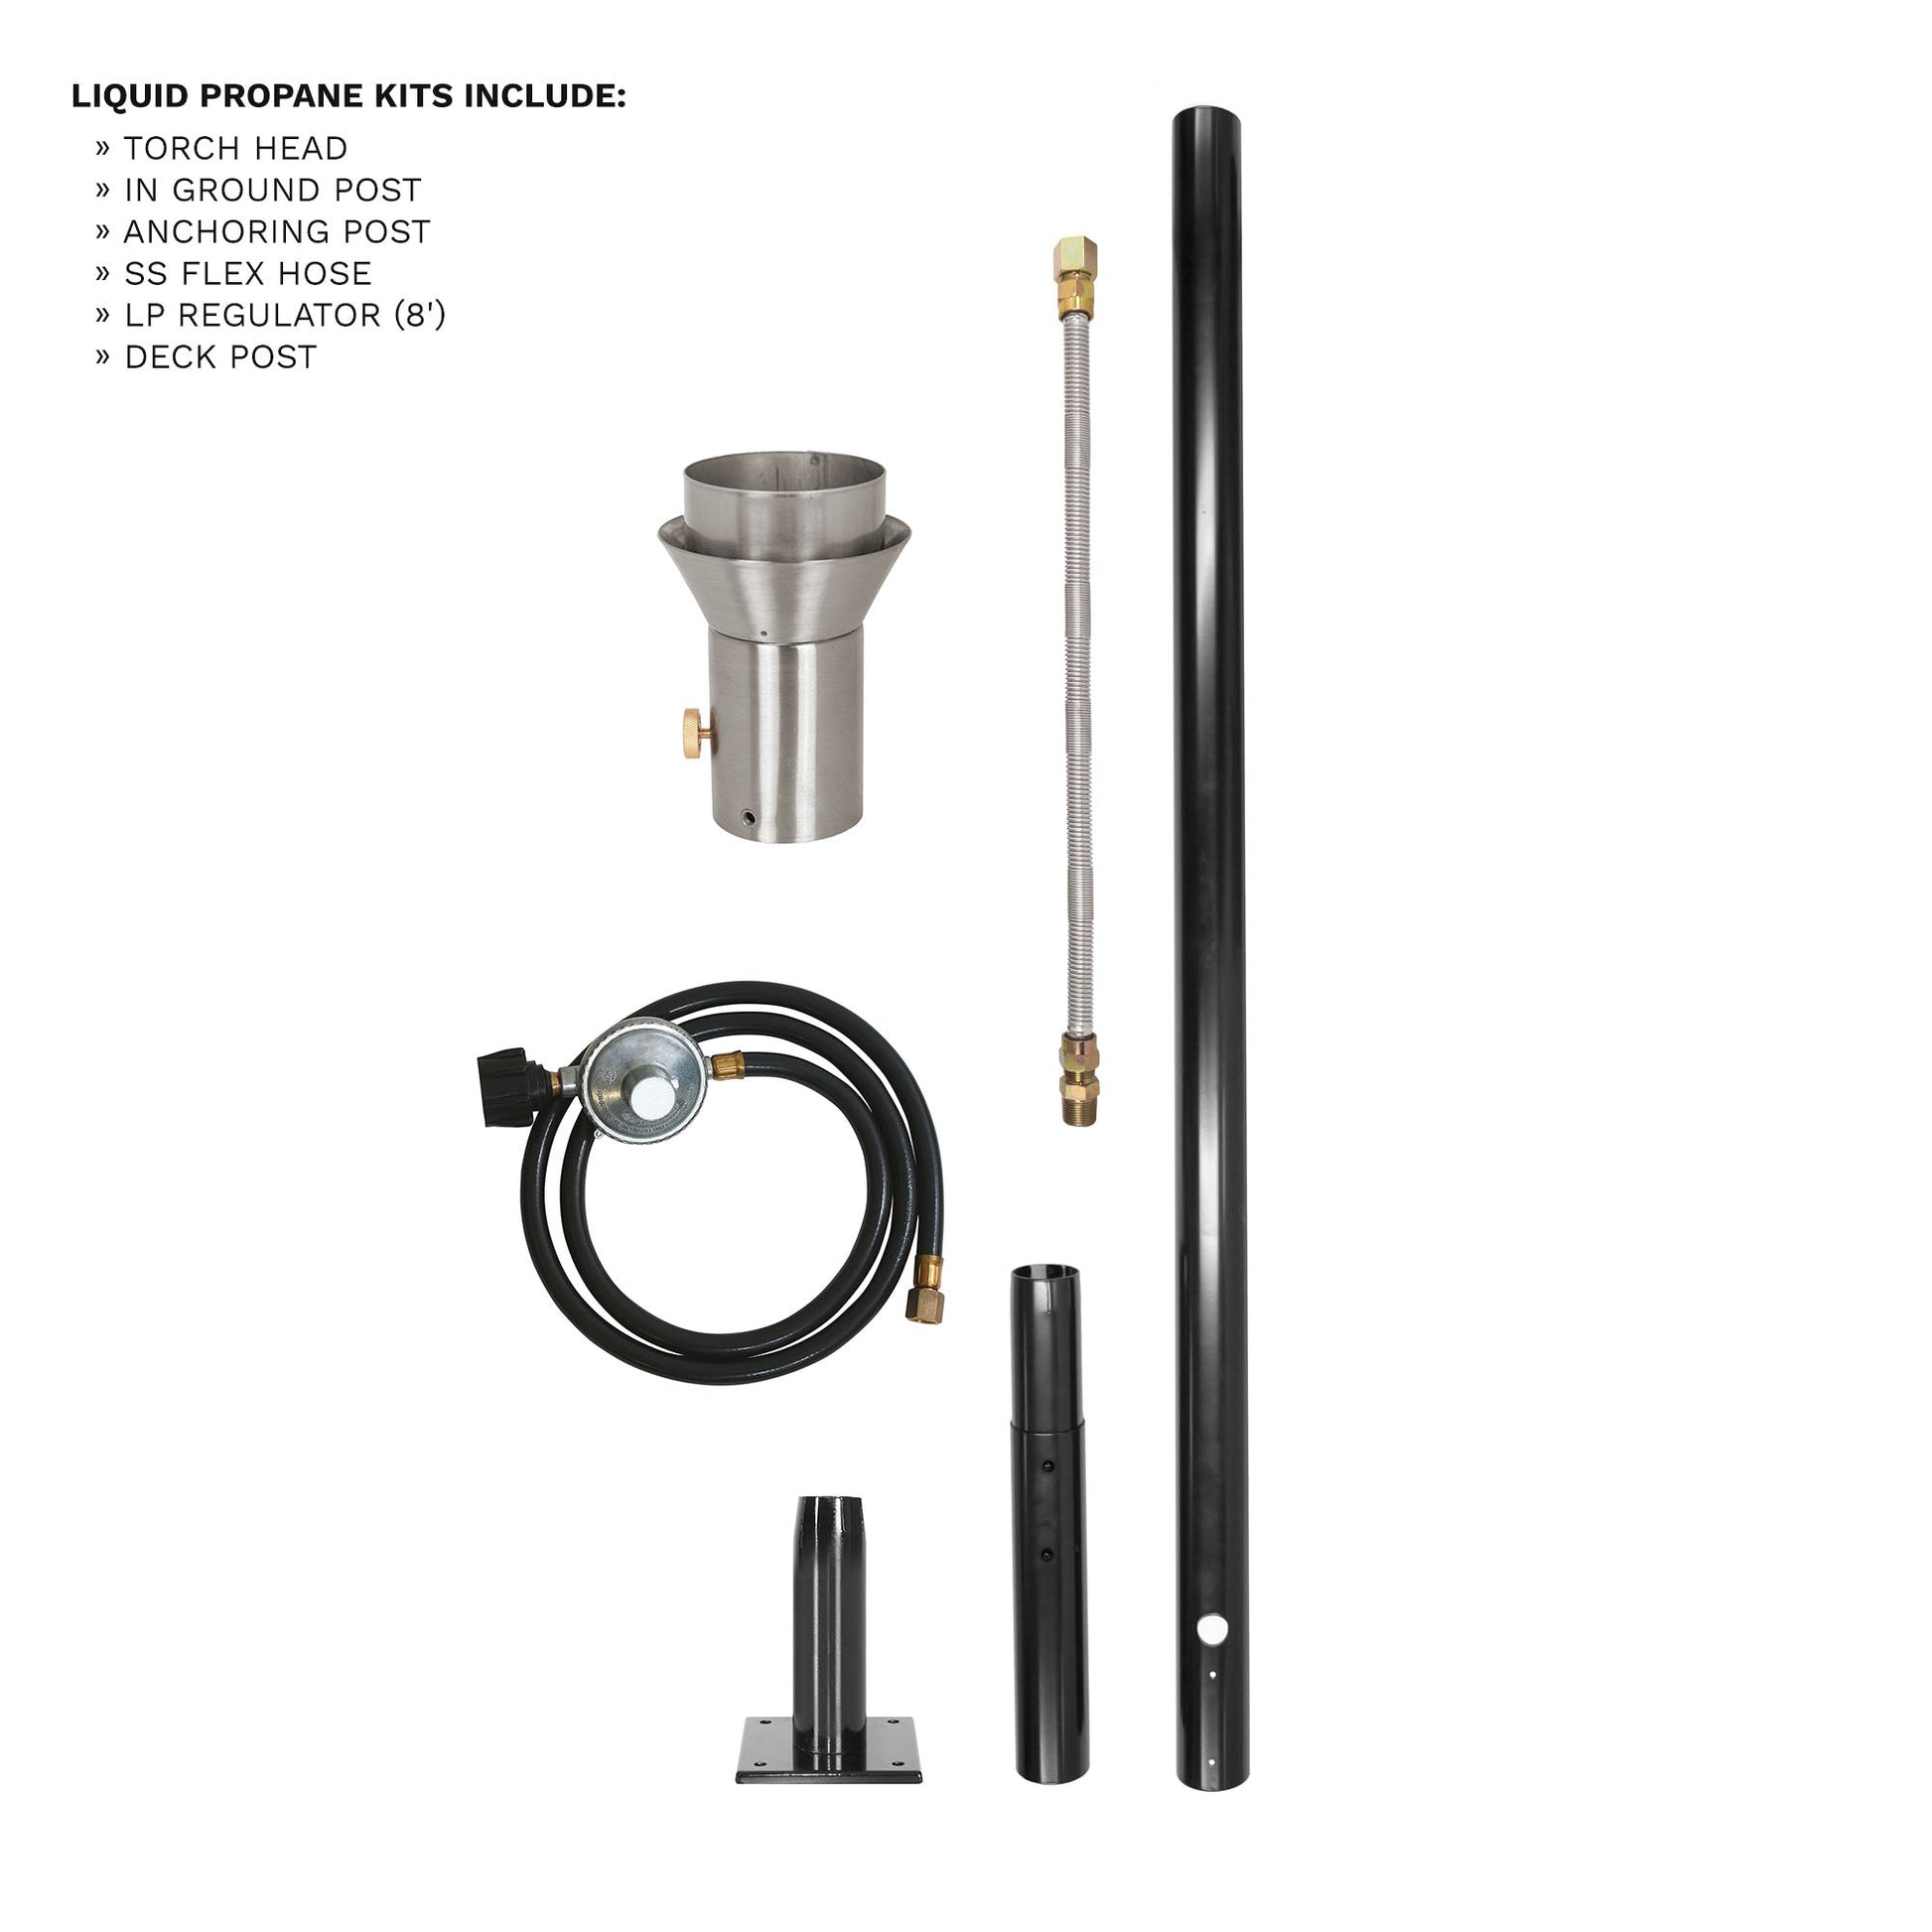 Coral Original TOP Torch & Post Complete Kit - Stainless Steel - Liquid Propane-Novel Home